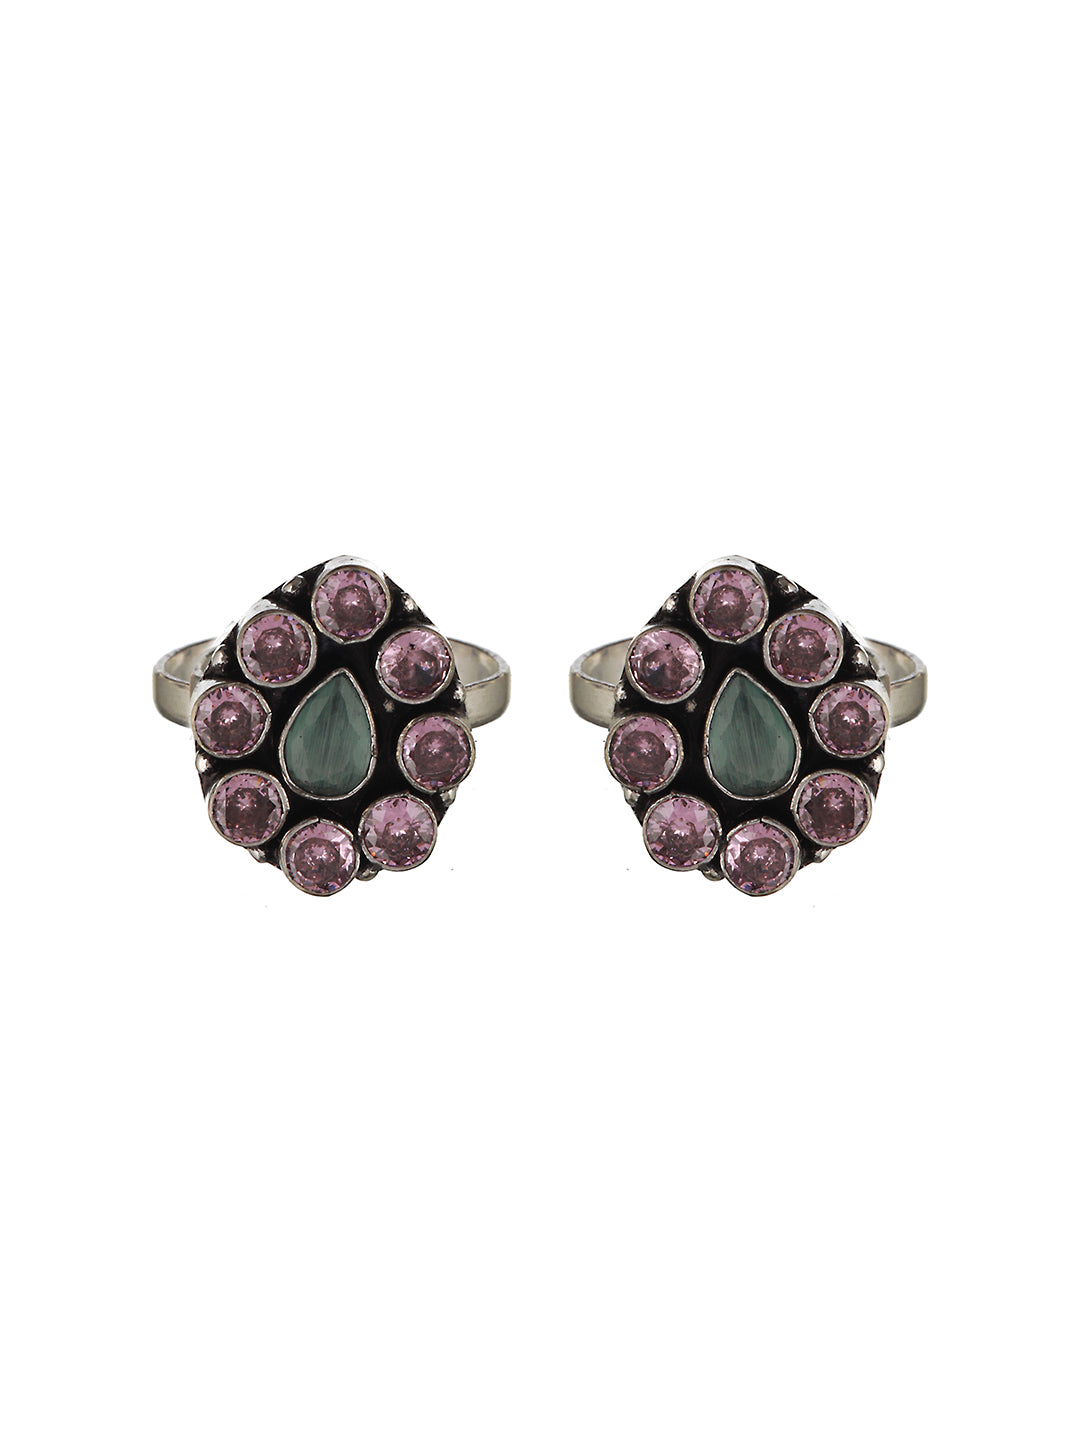 Set of 2 Silver Oxidised Pink AD Studded Floral Toe Rings, zaveri pearls, sale price rs, sale price, sale gold plated, sale gold, sale, rubans, ring, regular price, priyassi jewellery, kushal